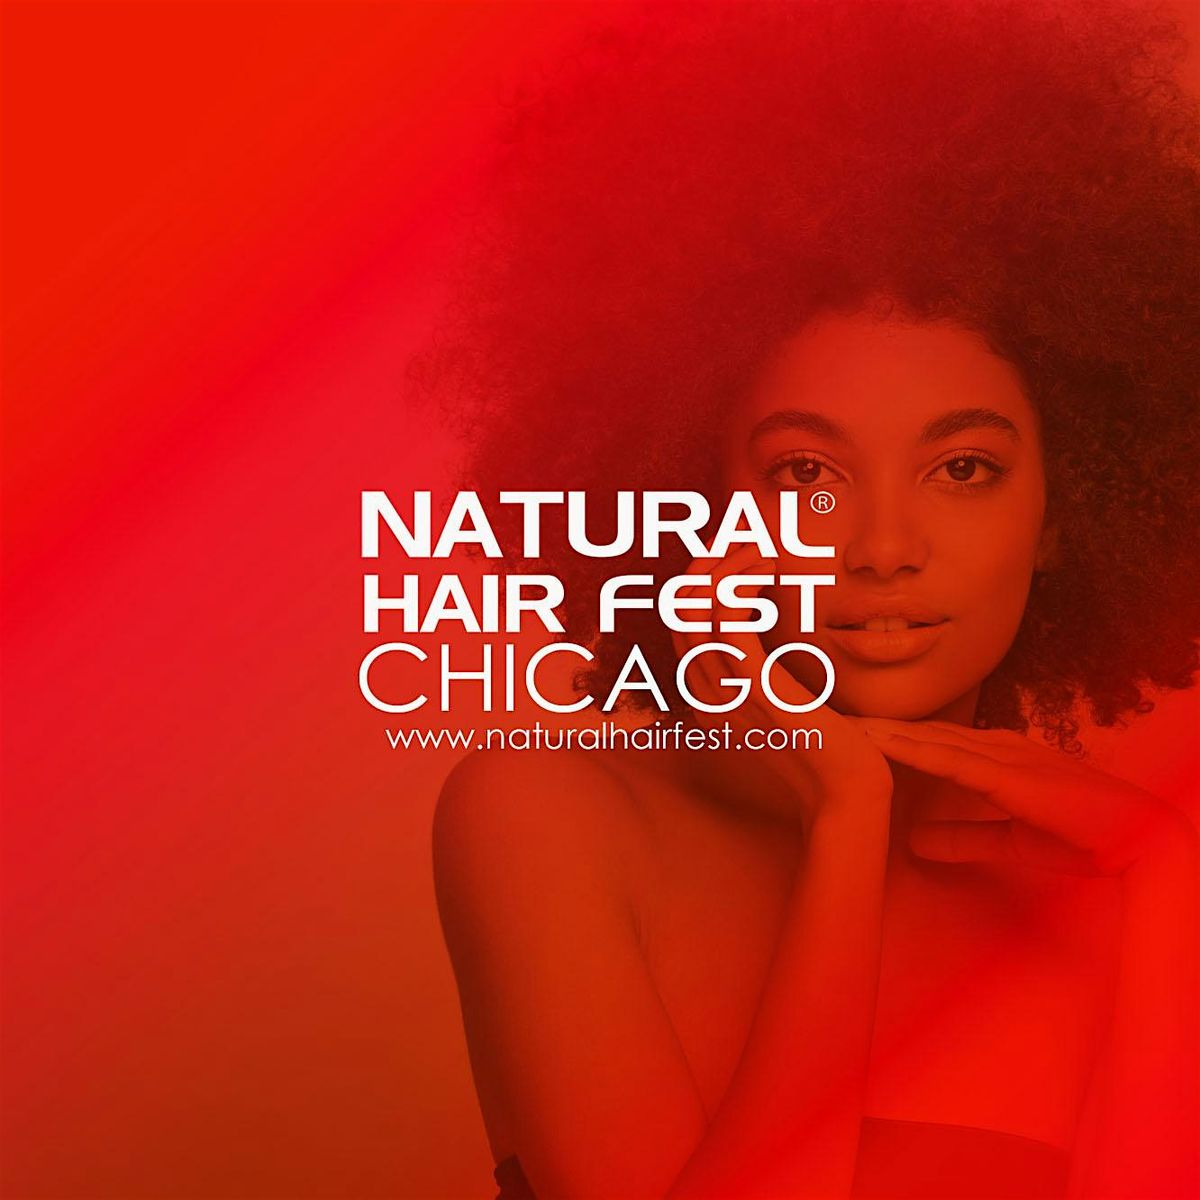 Natural Hair Fest Chicago has Vendor Space Available EARLY BIRD DAY 1